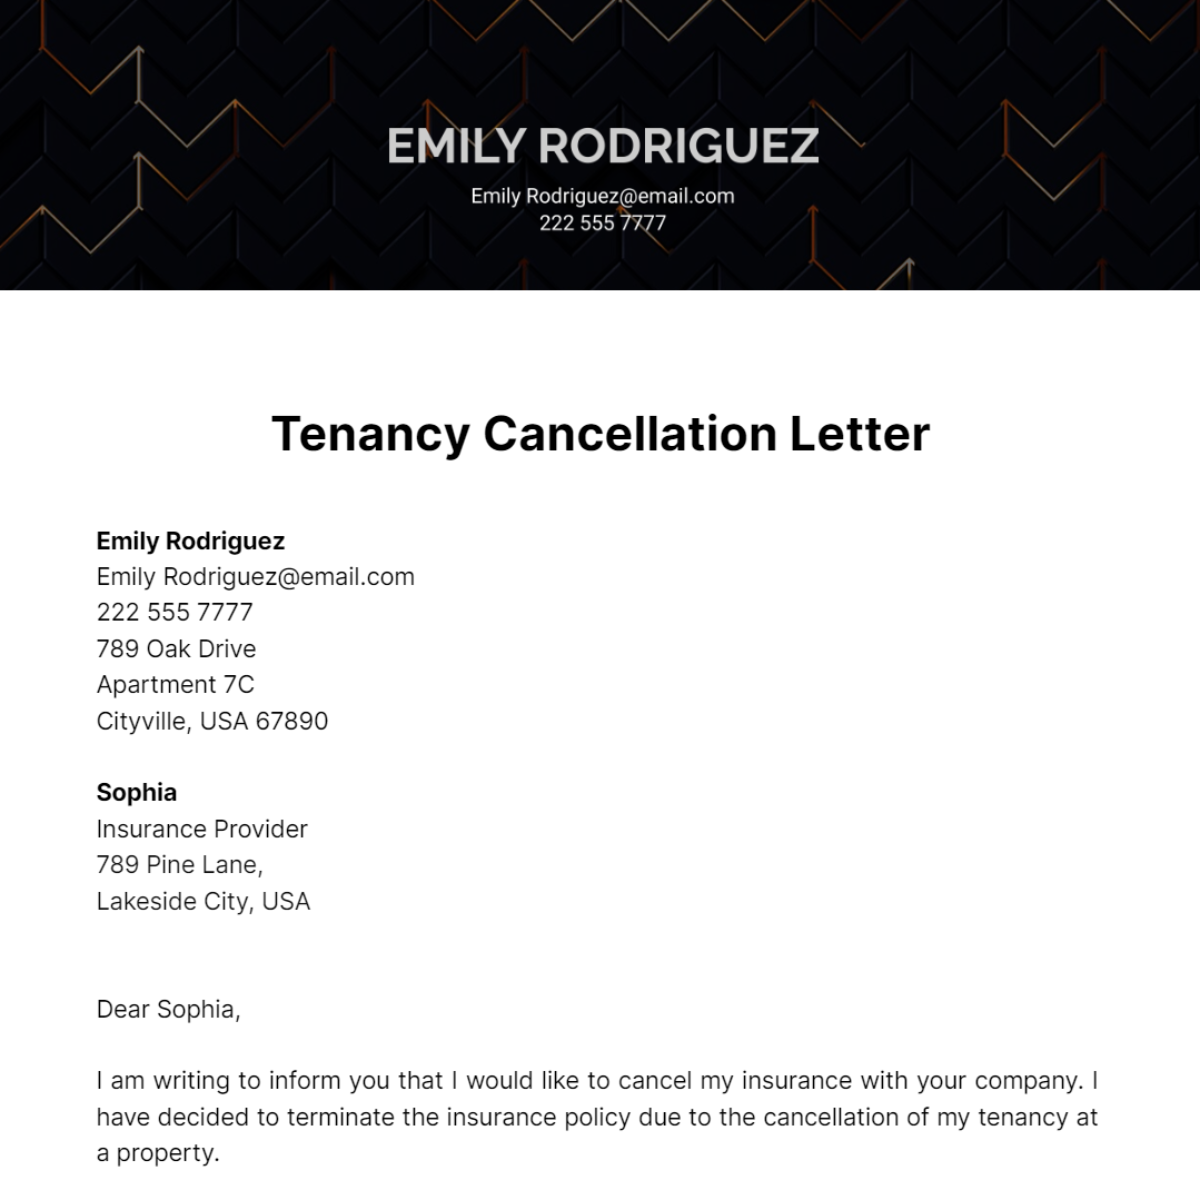 Tenancy Cancellation Letter Template